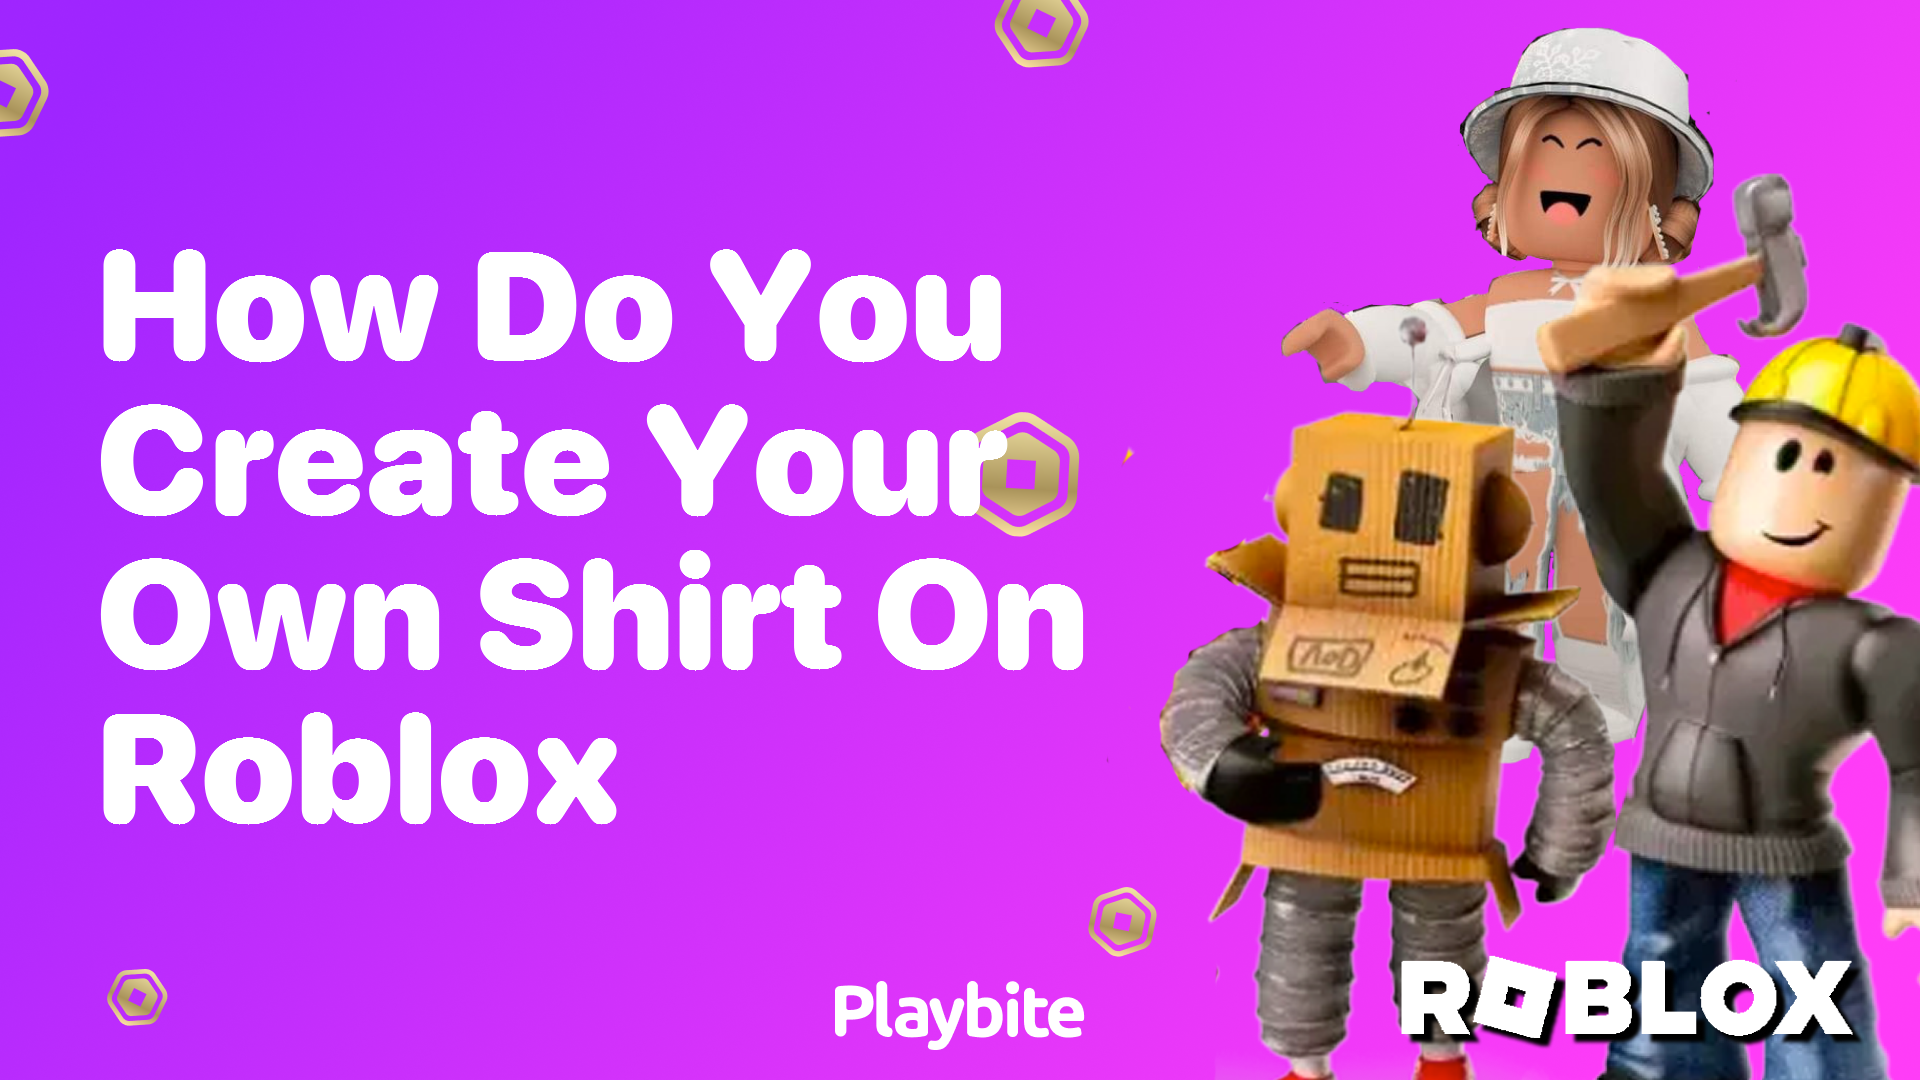 How Do You Create Your Own Shirt on Roblox?